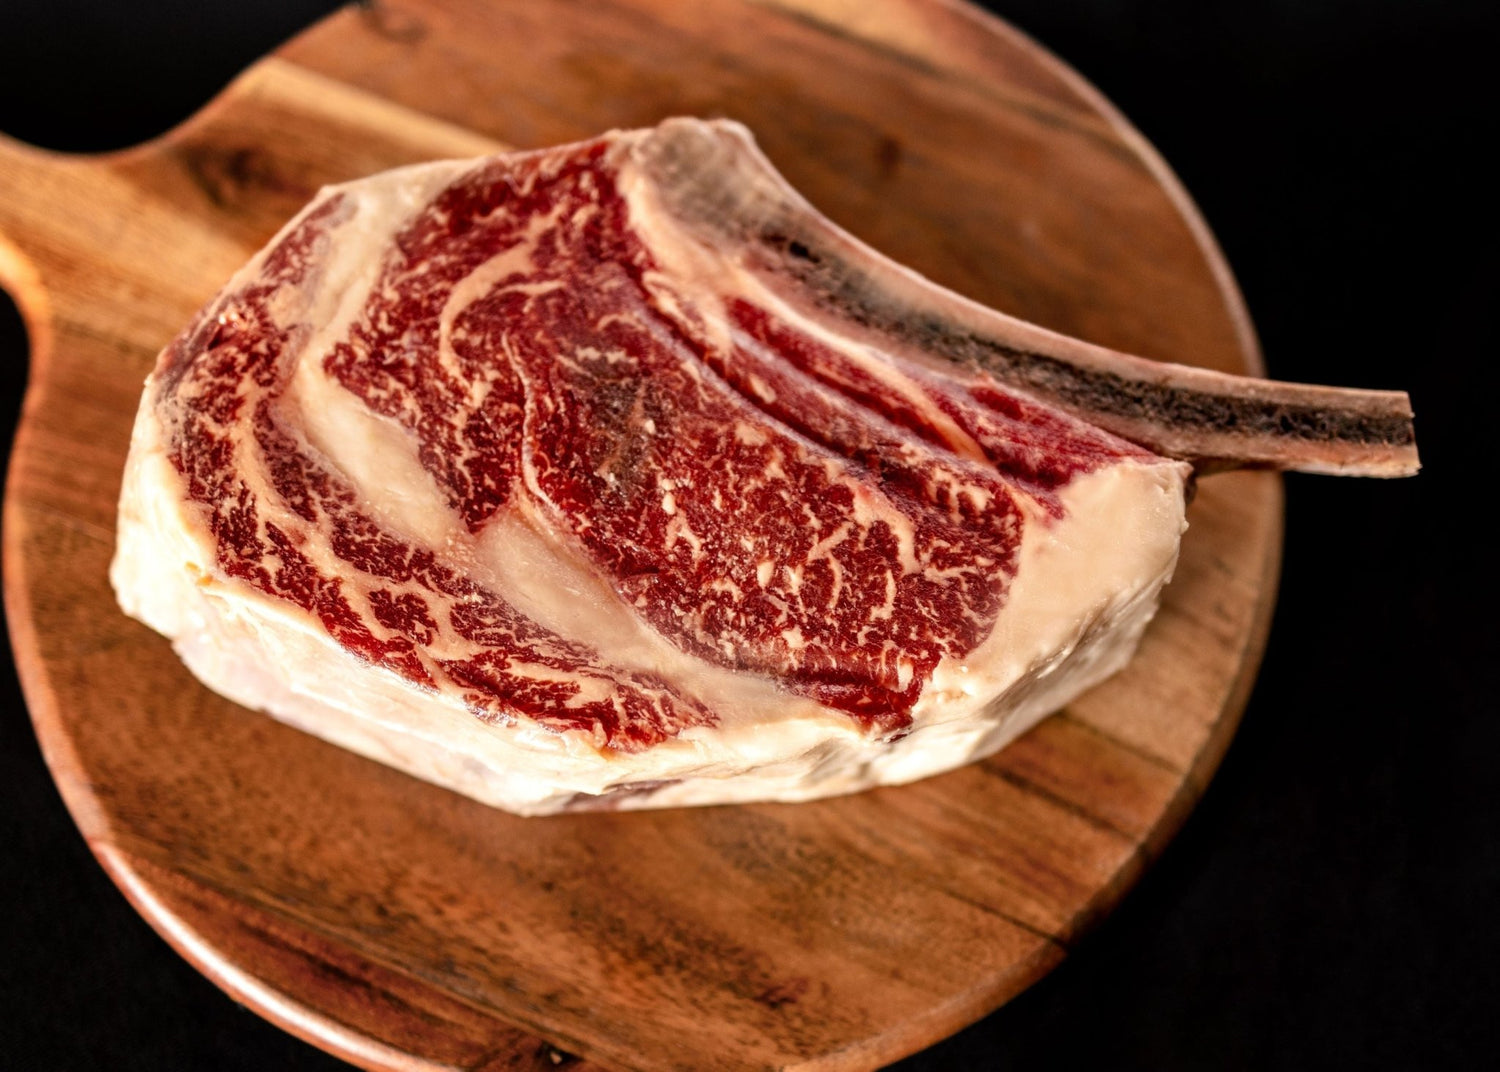 All Natural Grass & Flax-Fed & Finished American Wagyu Beef - The Hufeisen-Ranch (WYO Wagyu)